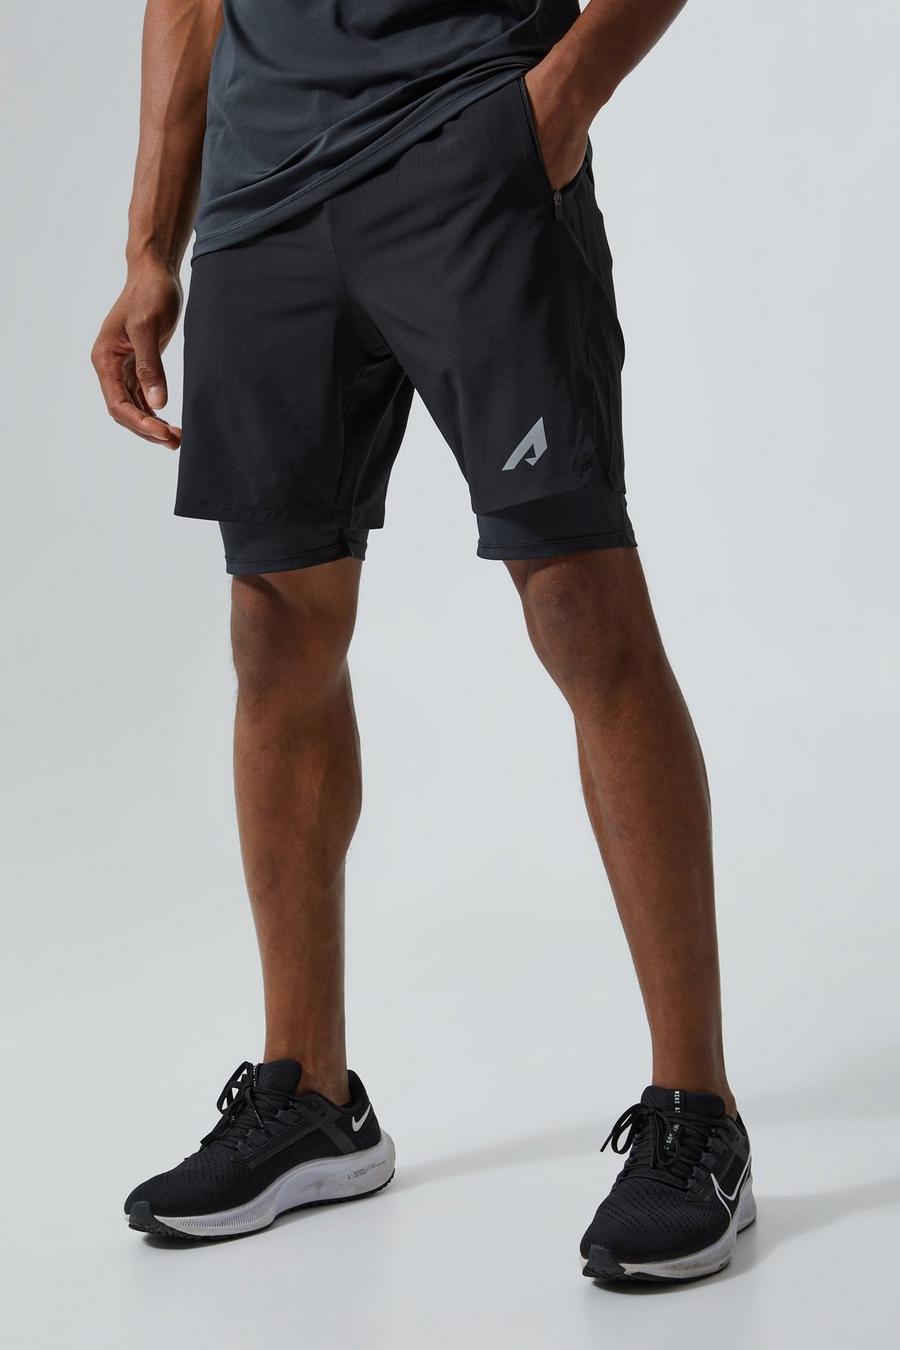 Black Active 2 In 1 Reflective Shorts